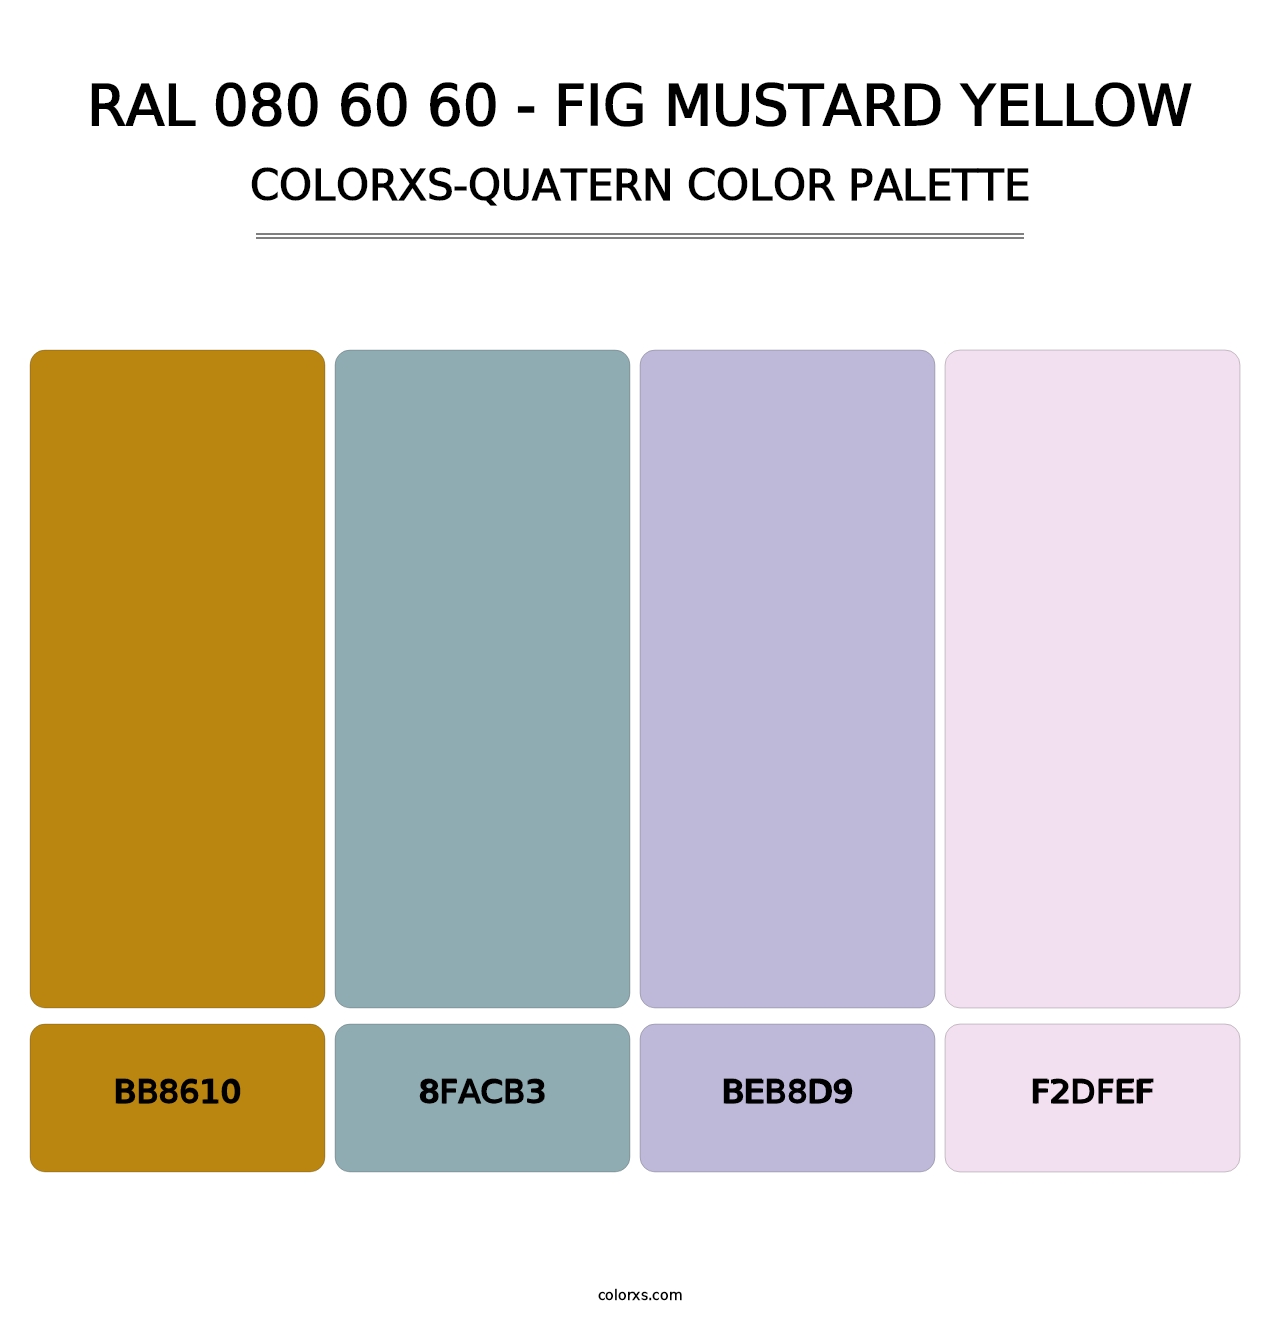 RAL 080 60 60 - Fig Mustard Yellow - Colorxs Quatern Palette